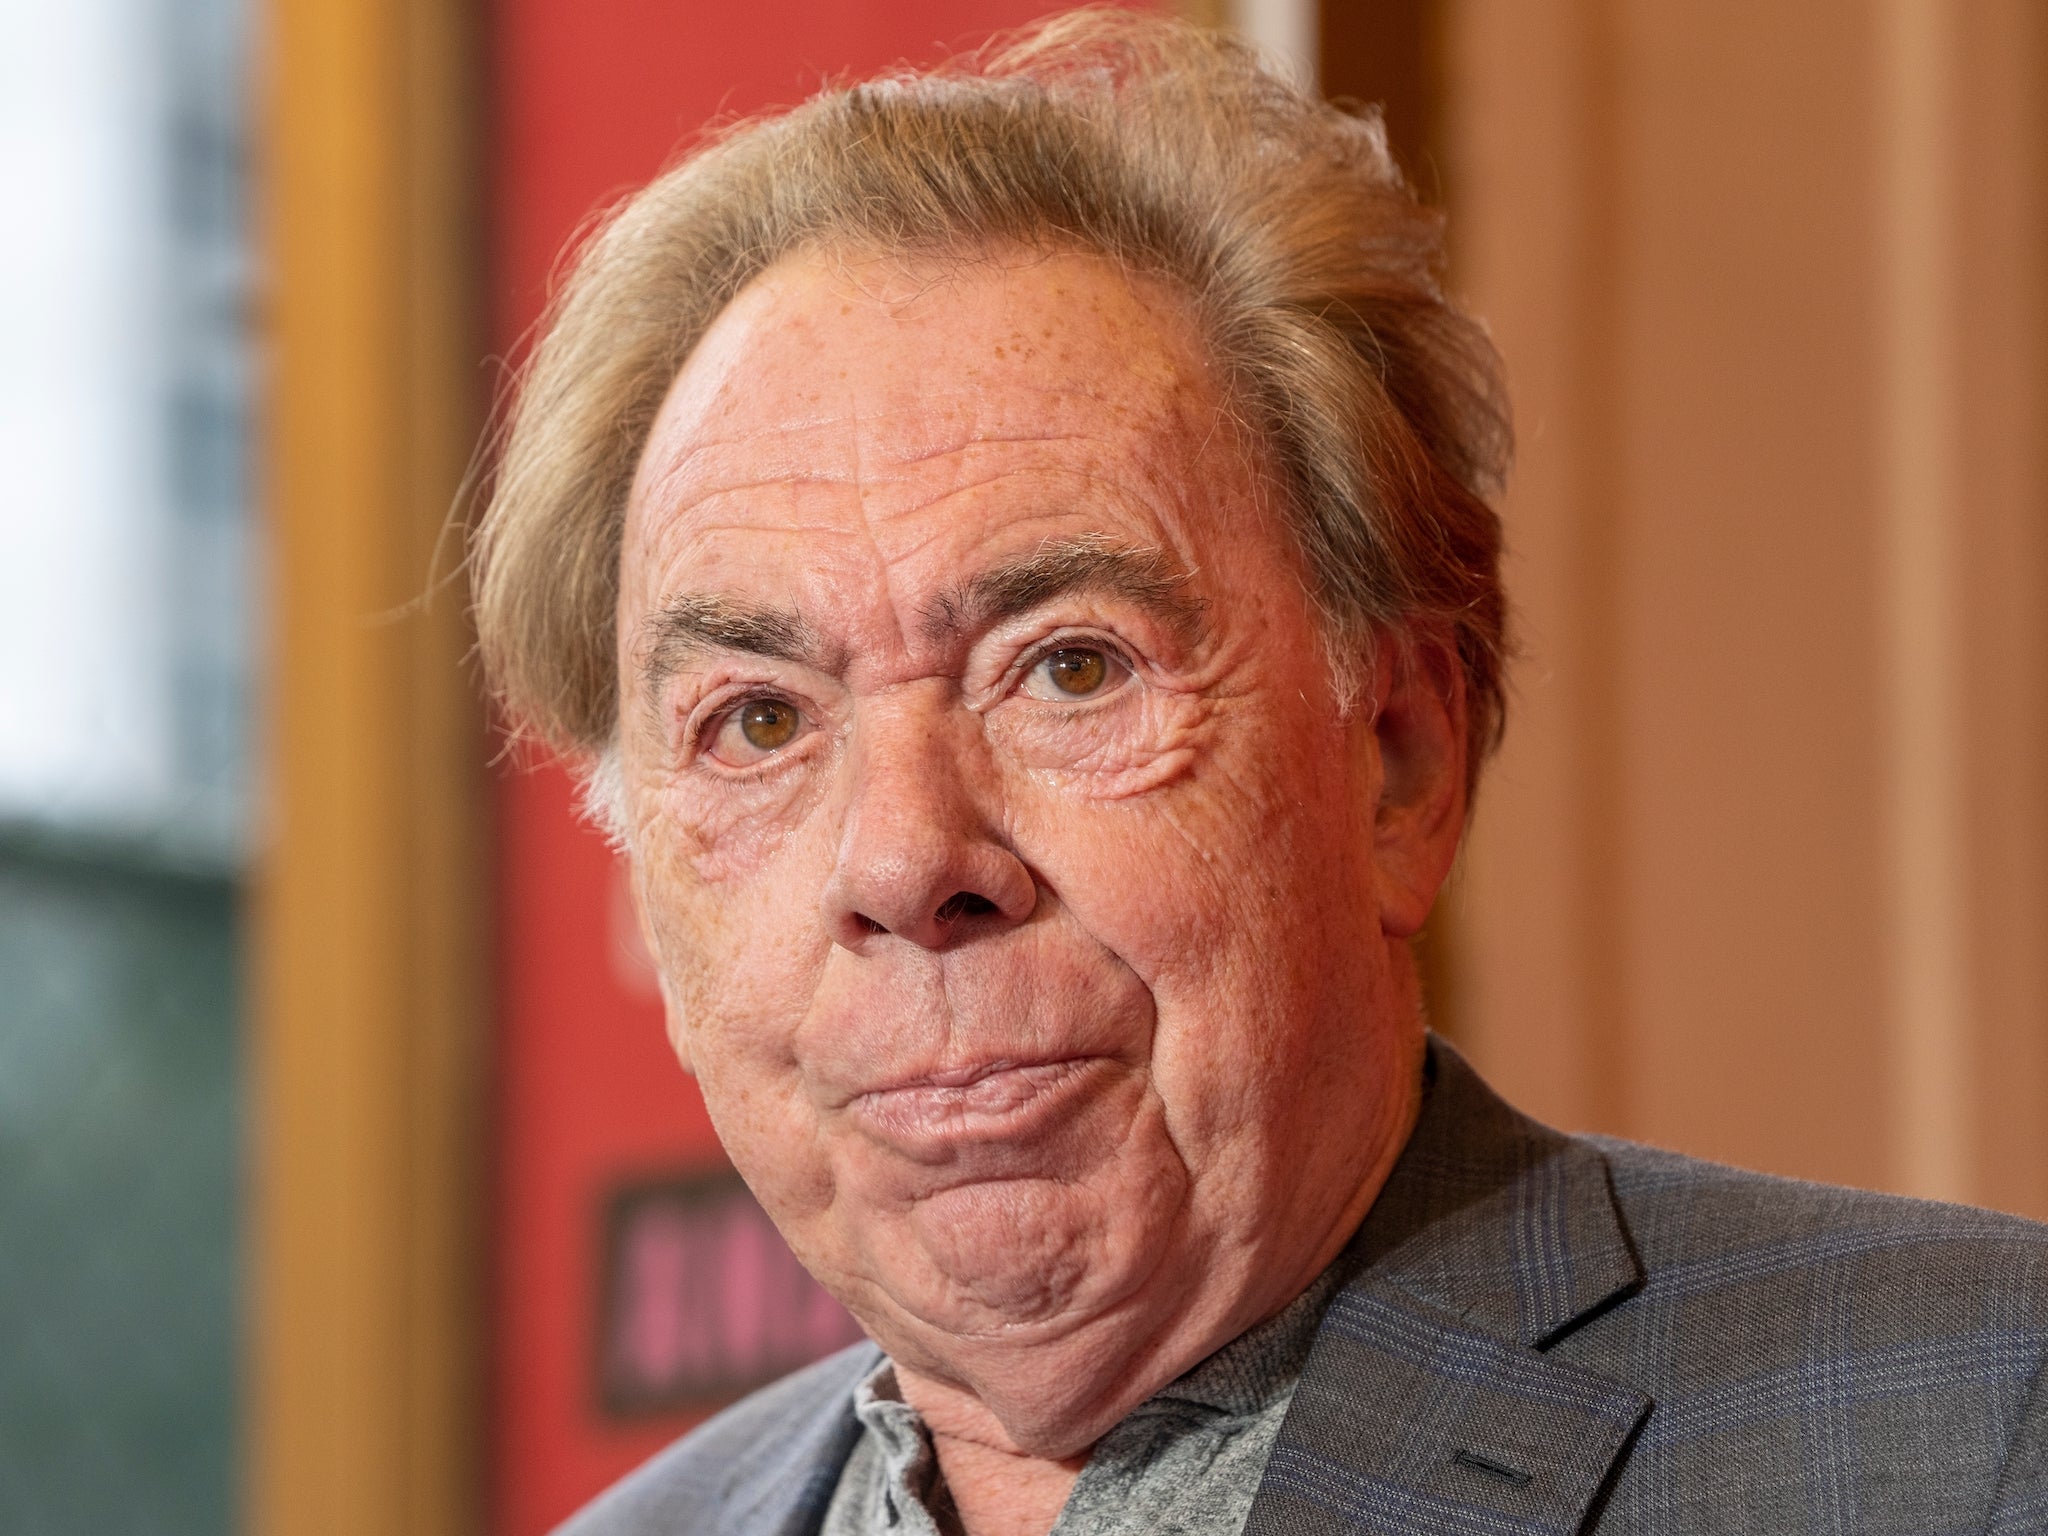 Lloyd Webber said he was ‘shattered’ by his son’s death